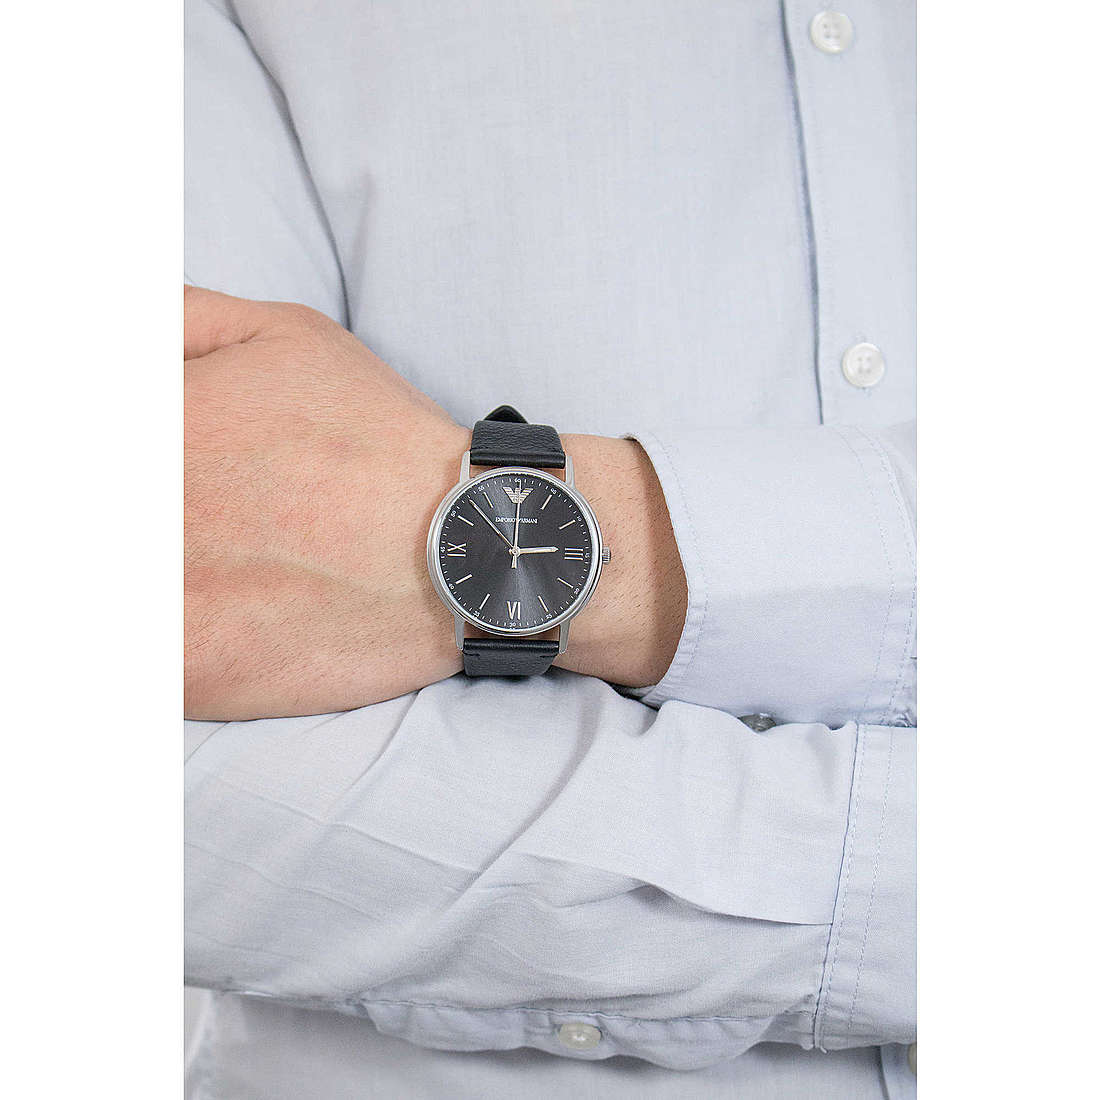 Emporio Armani only time man AR11013 wearing